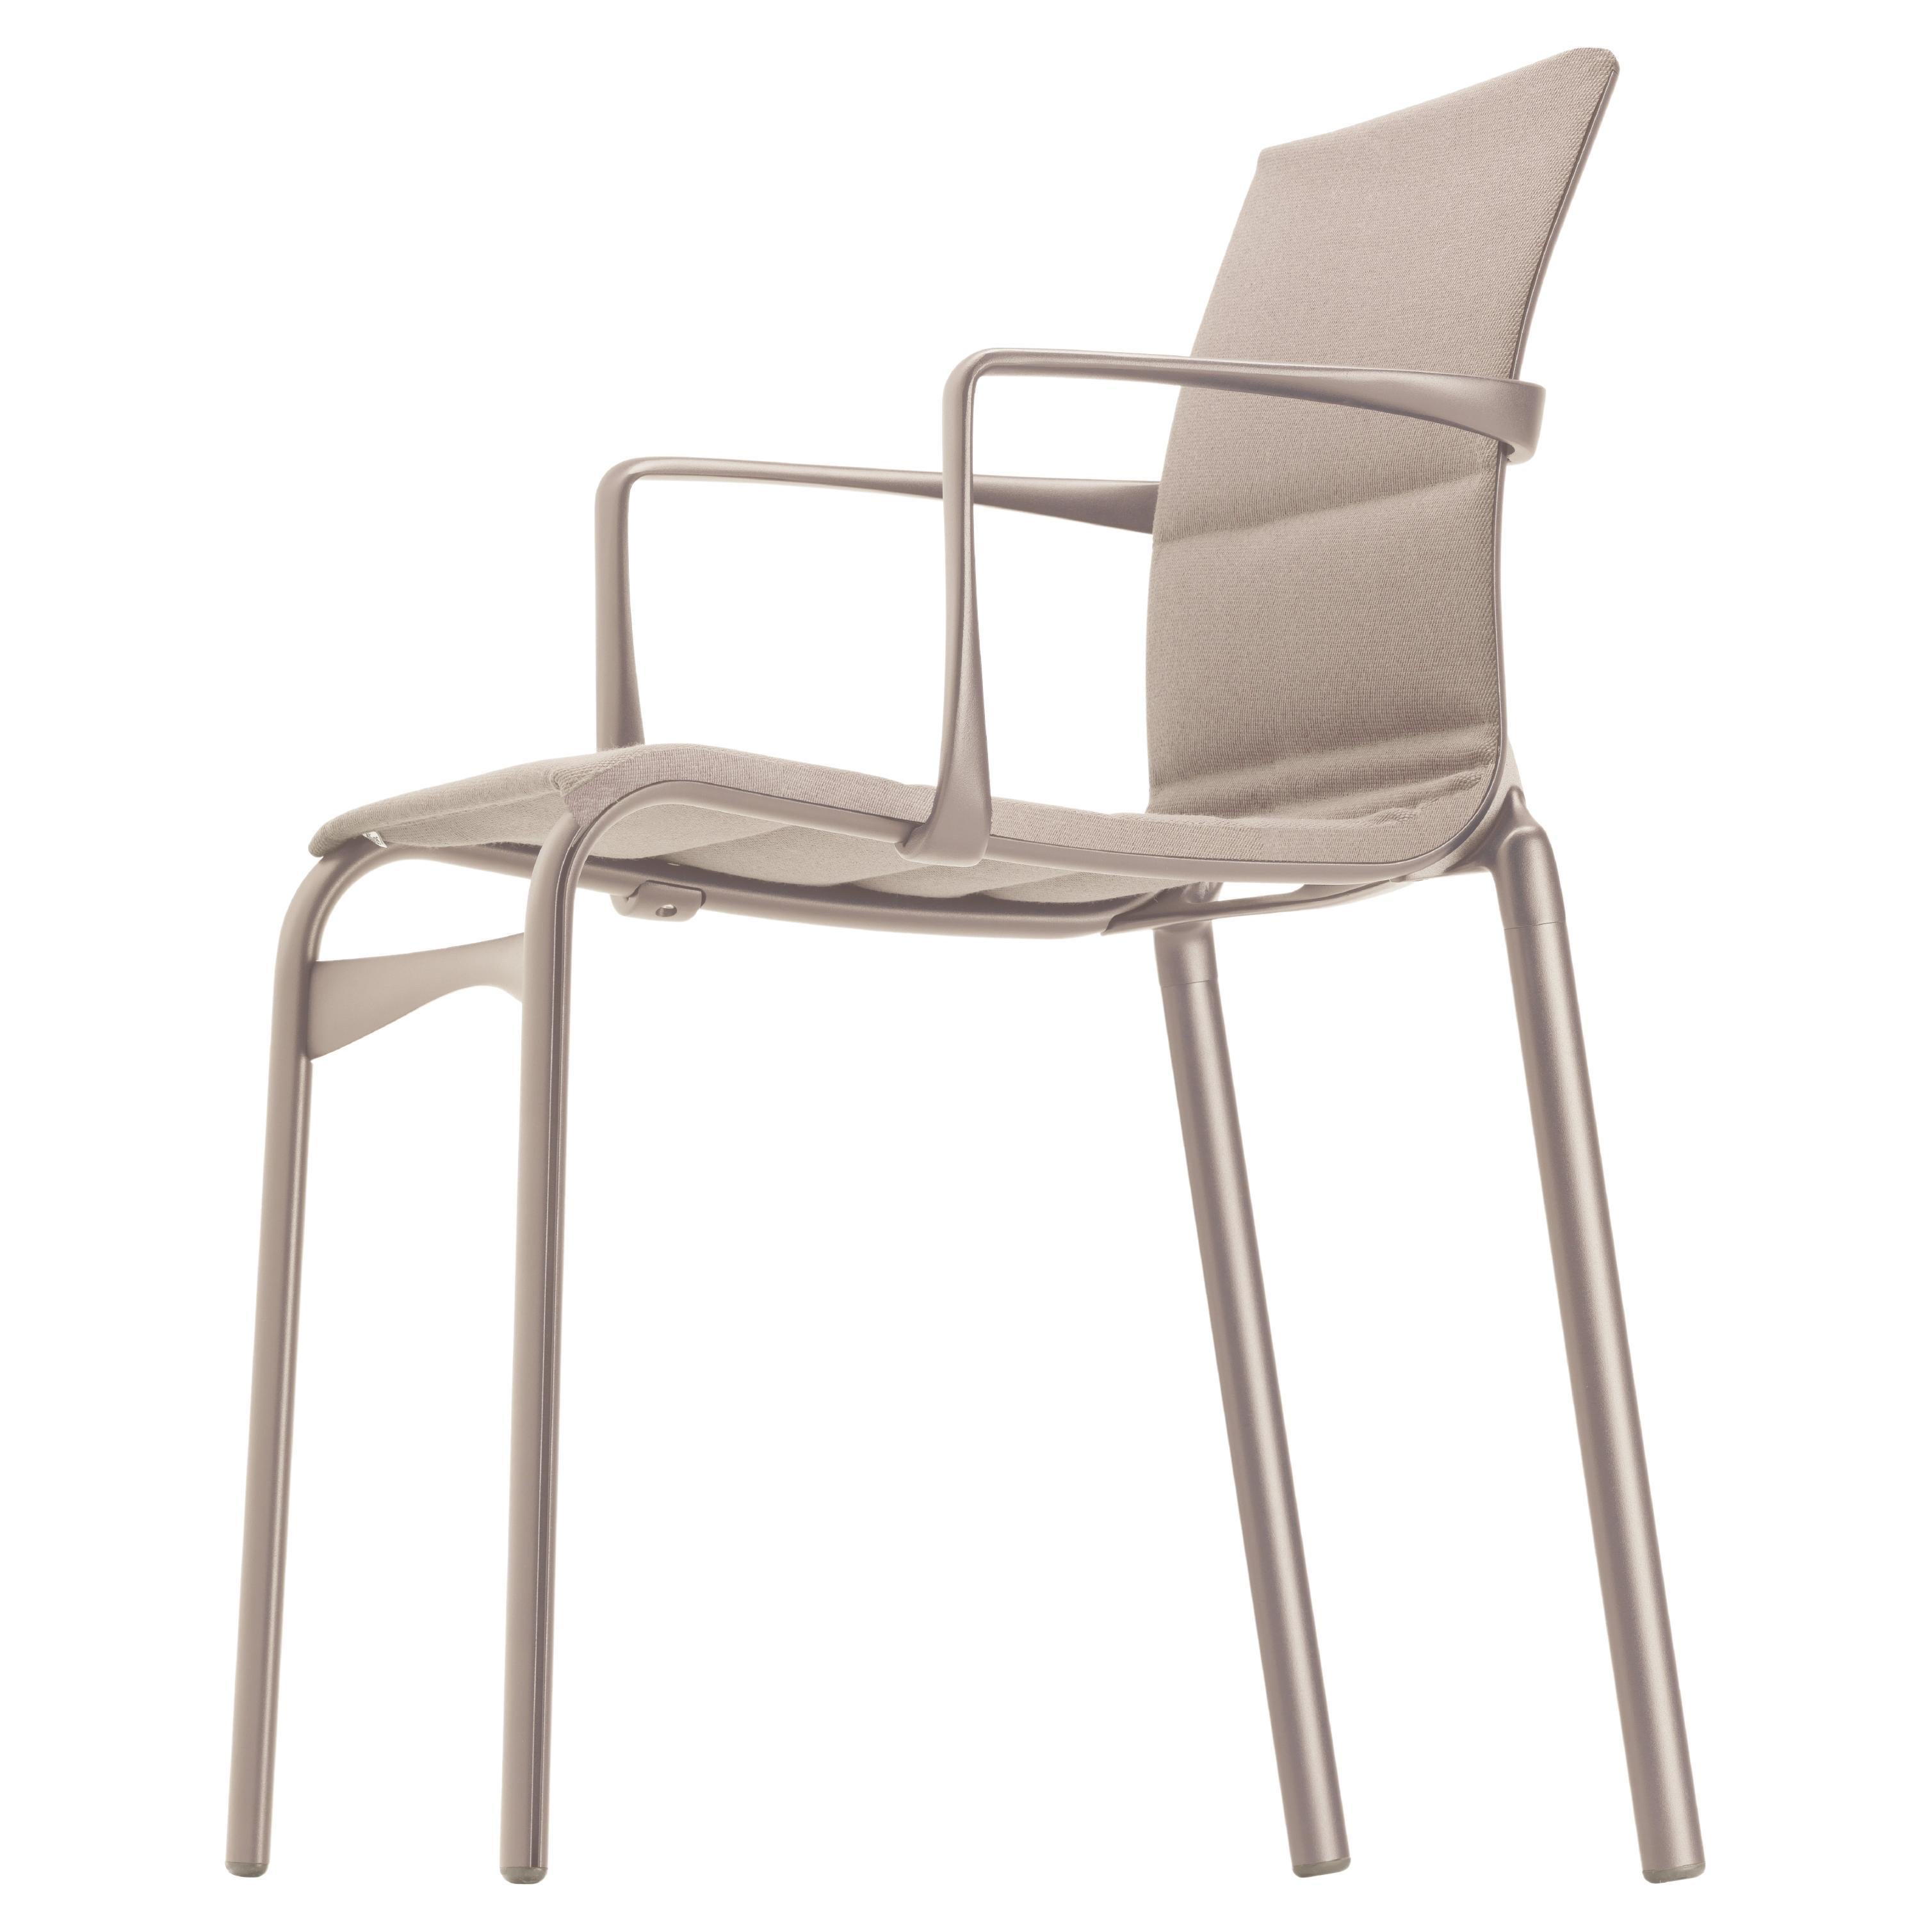 Alias 417 Highframe 40 Chair in Beige Seat with Sand Lacquered Aluminium Frame For Sale